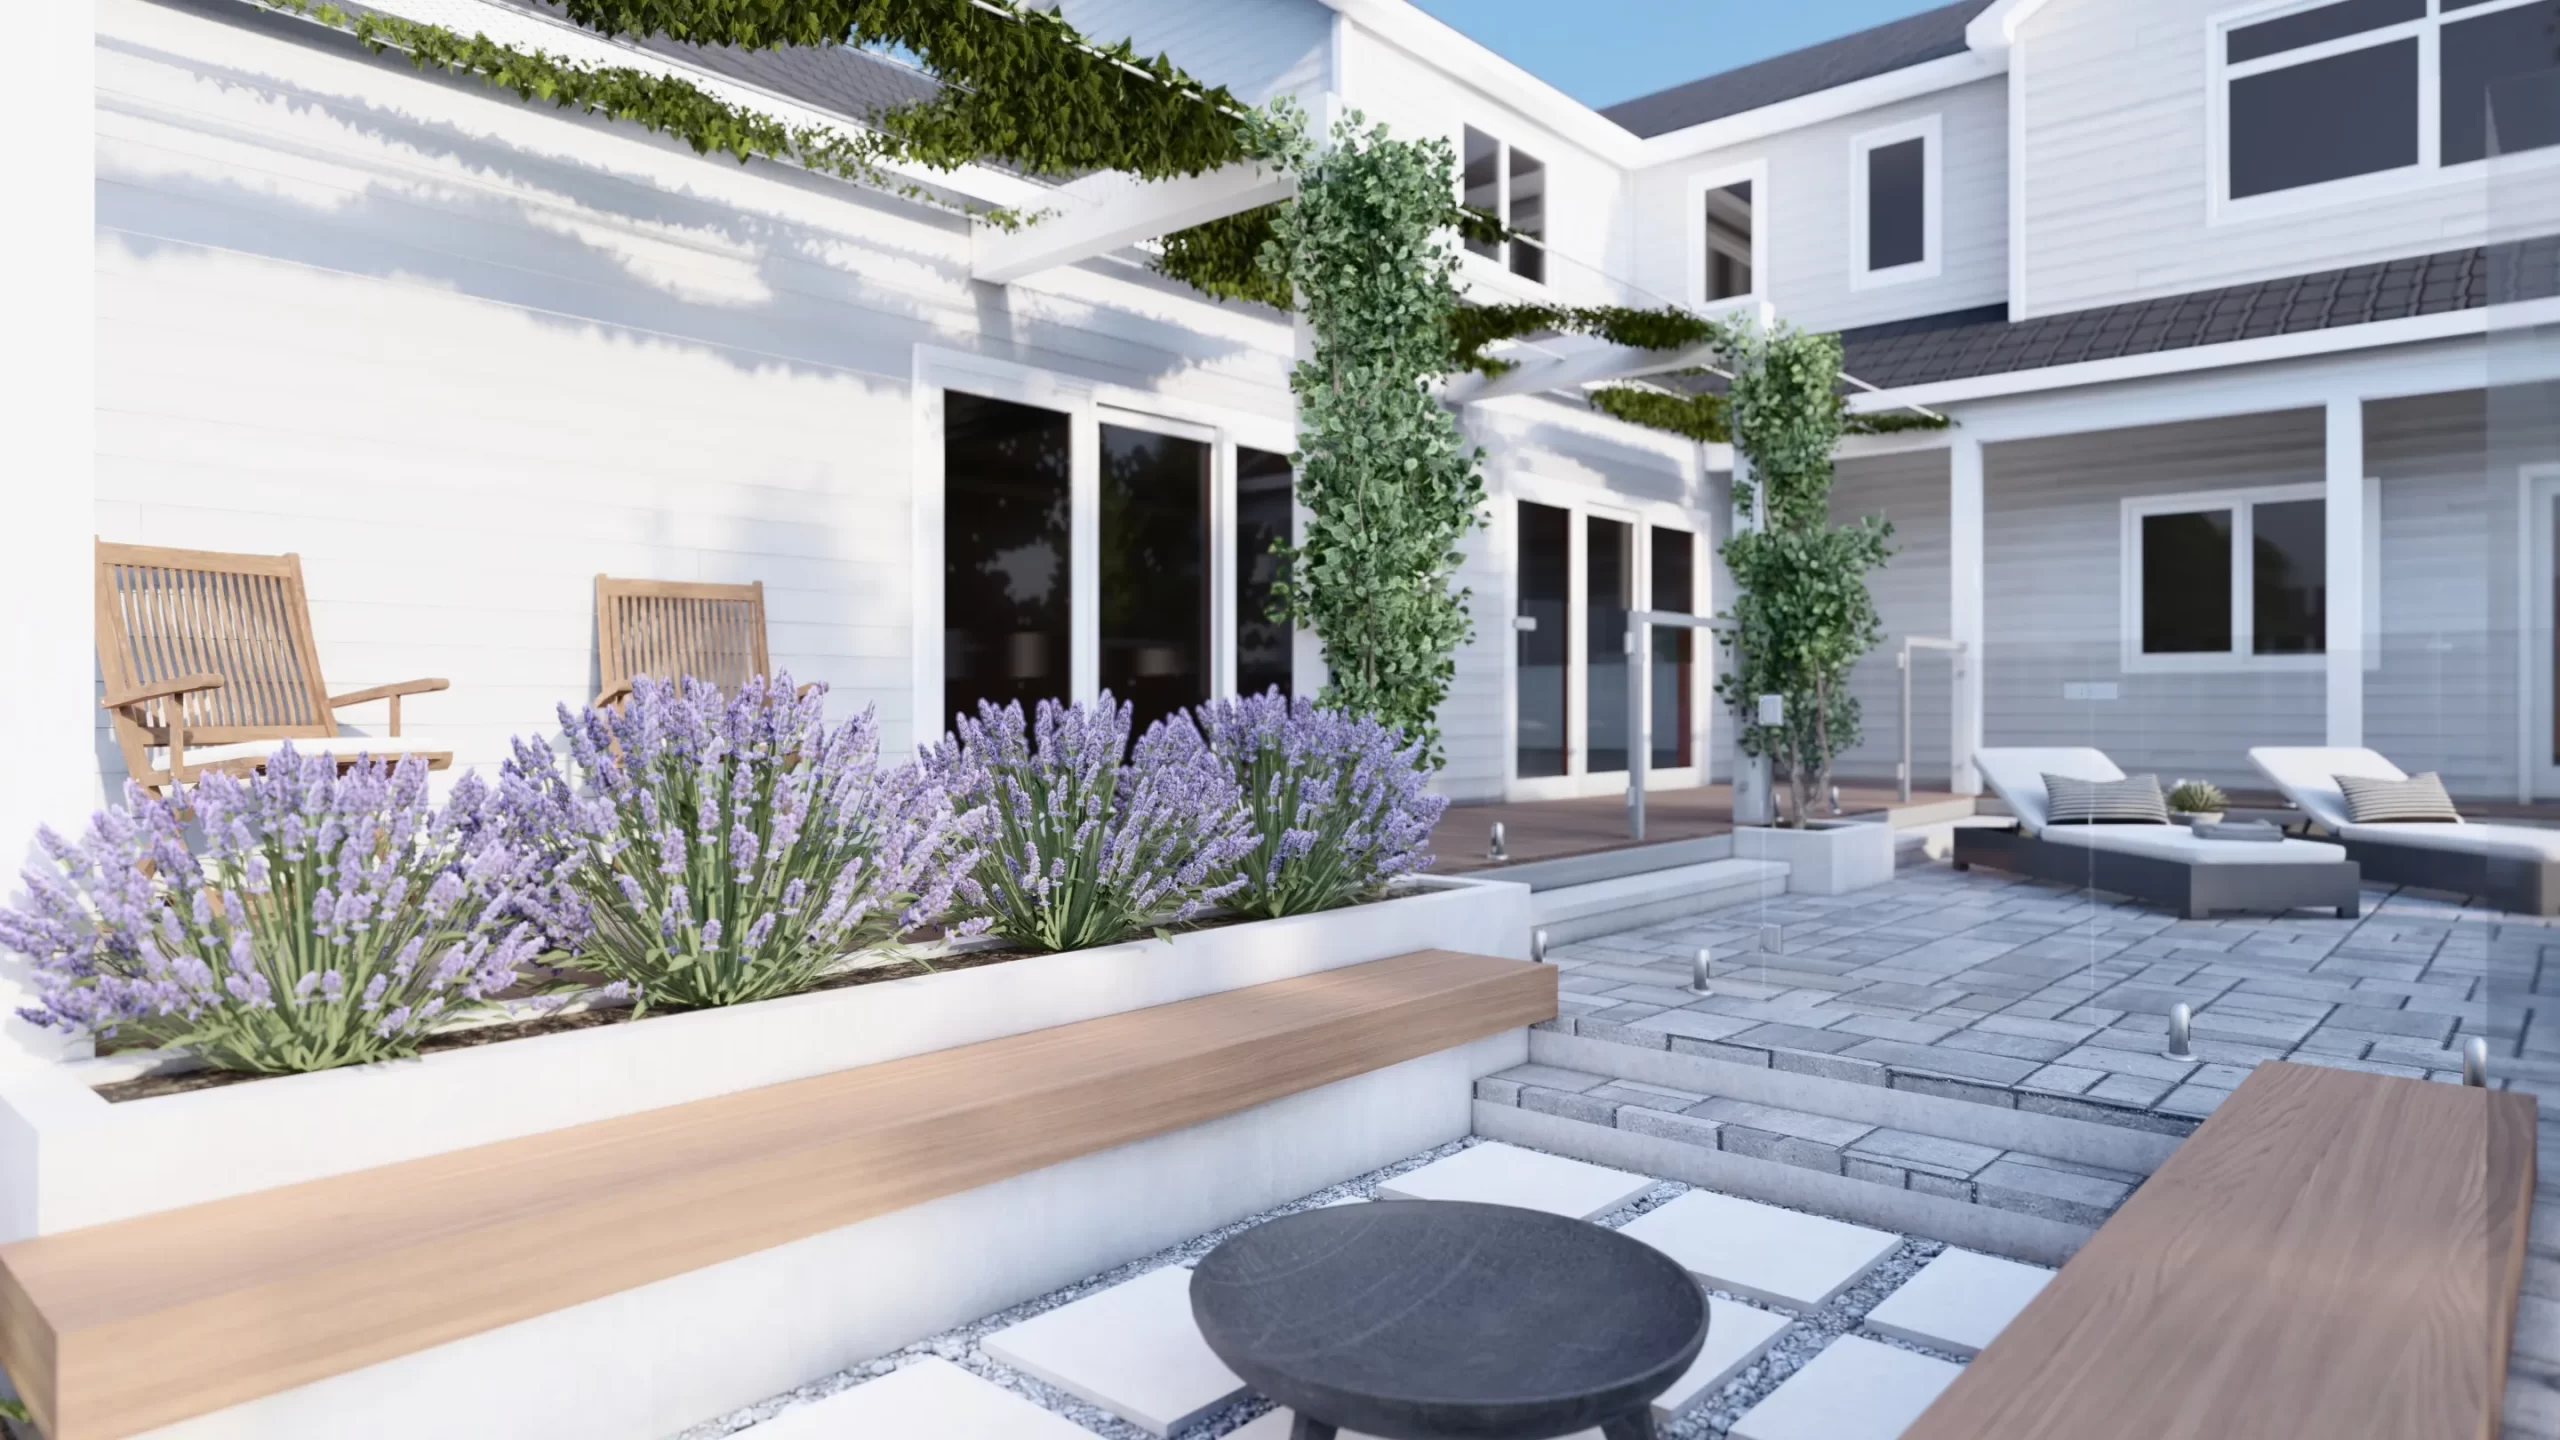 Design Scapes | Converting Neglected Outdoor Spaces Into Vibrant Patios